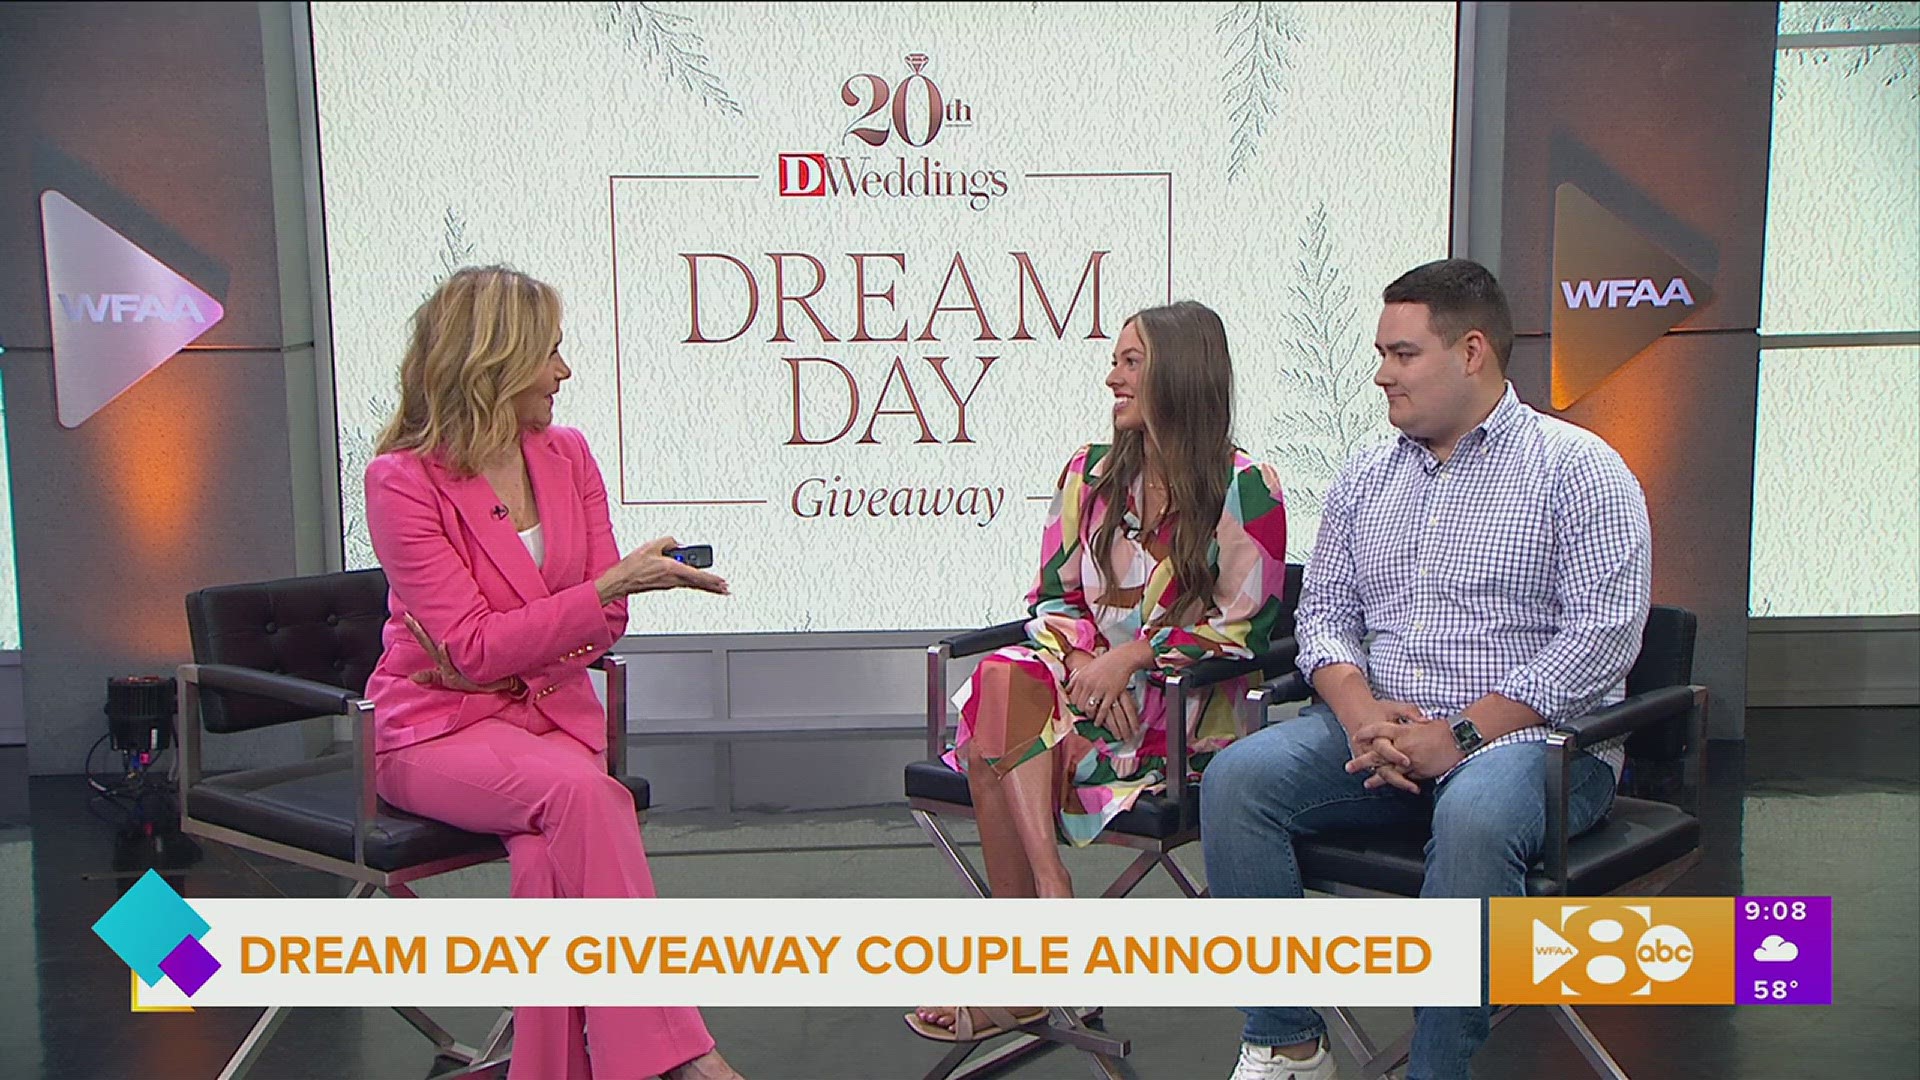 D Magazine announces the winning couple for its Dream Day Giveaway. Their inspiring love story and their dreams for the big day!